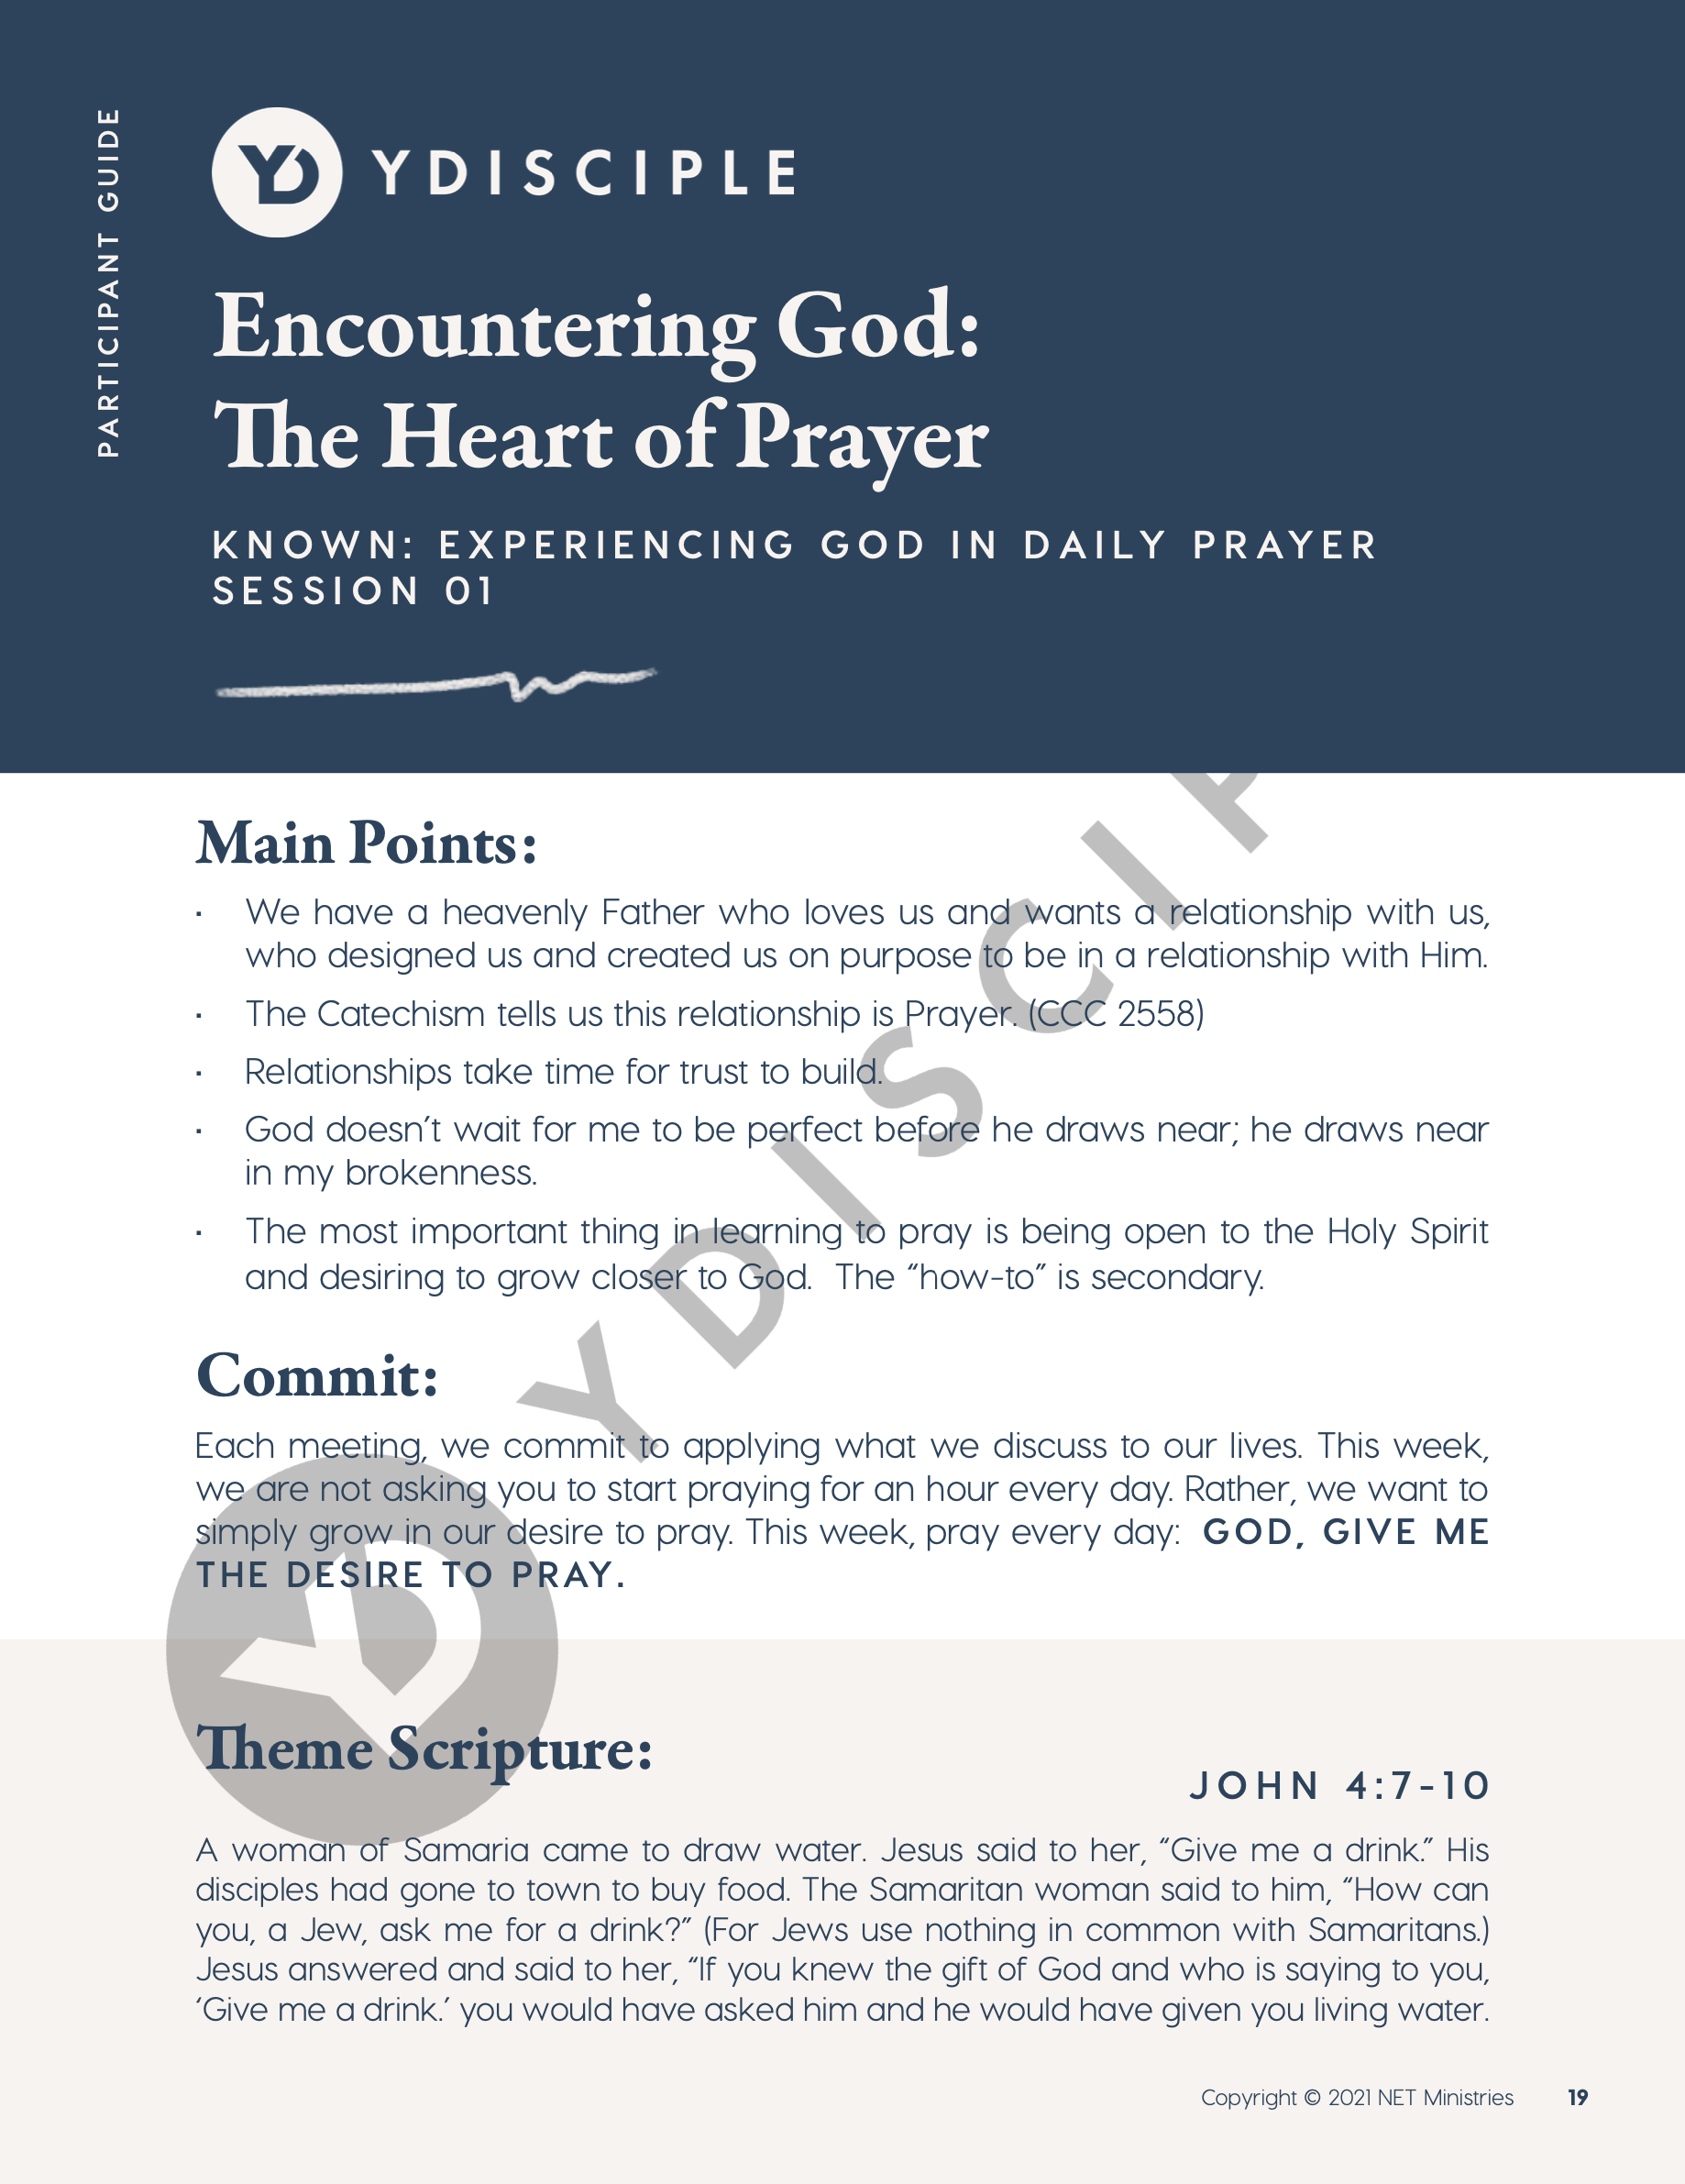 Known: Experiencing God in Daily Prayer (Digital Download)